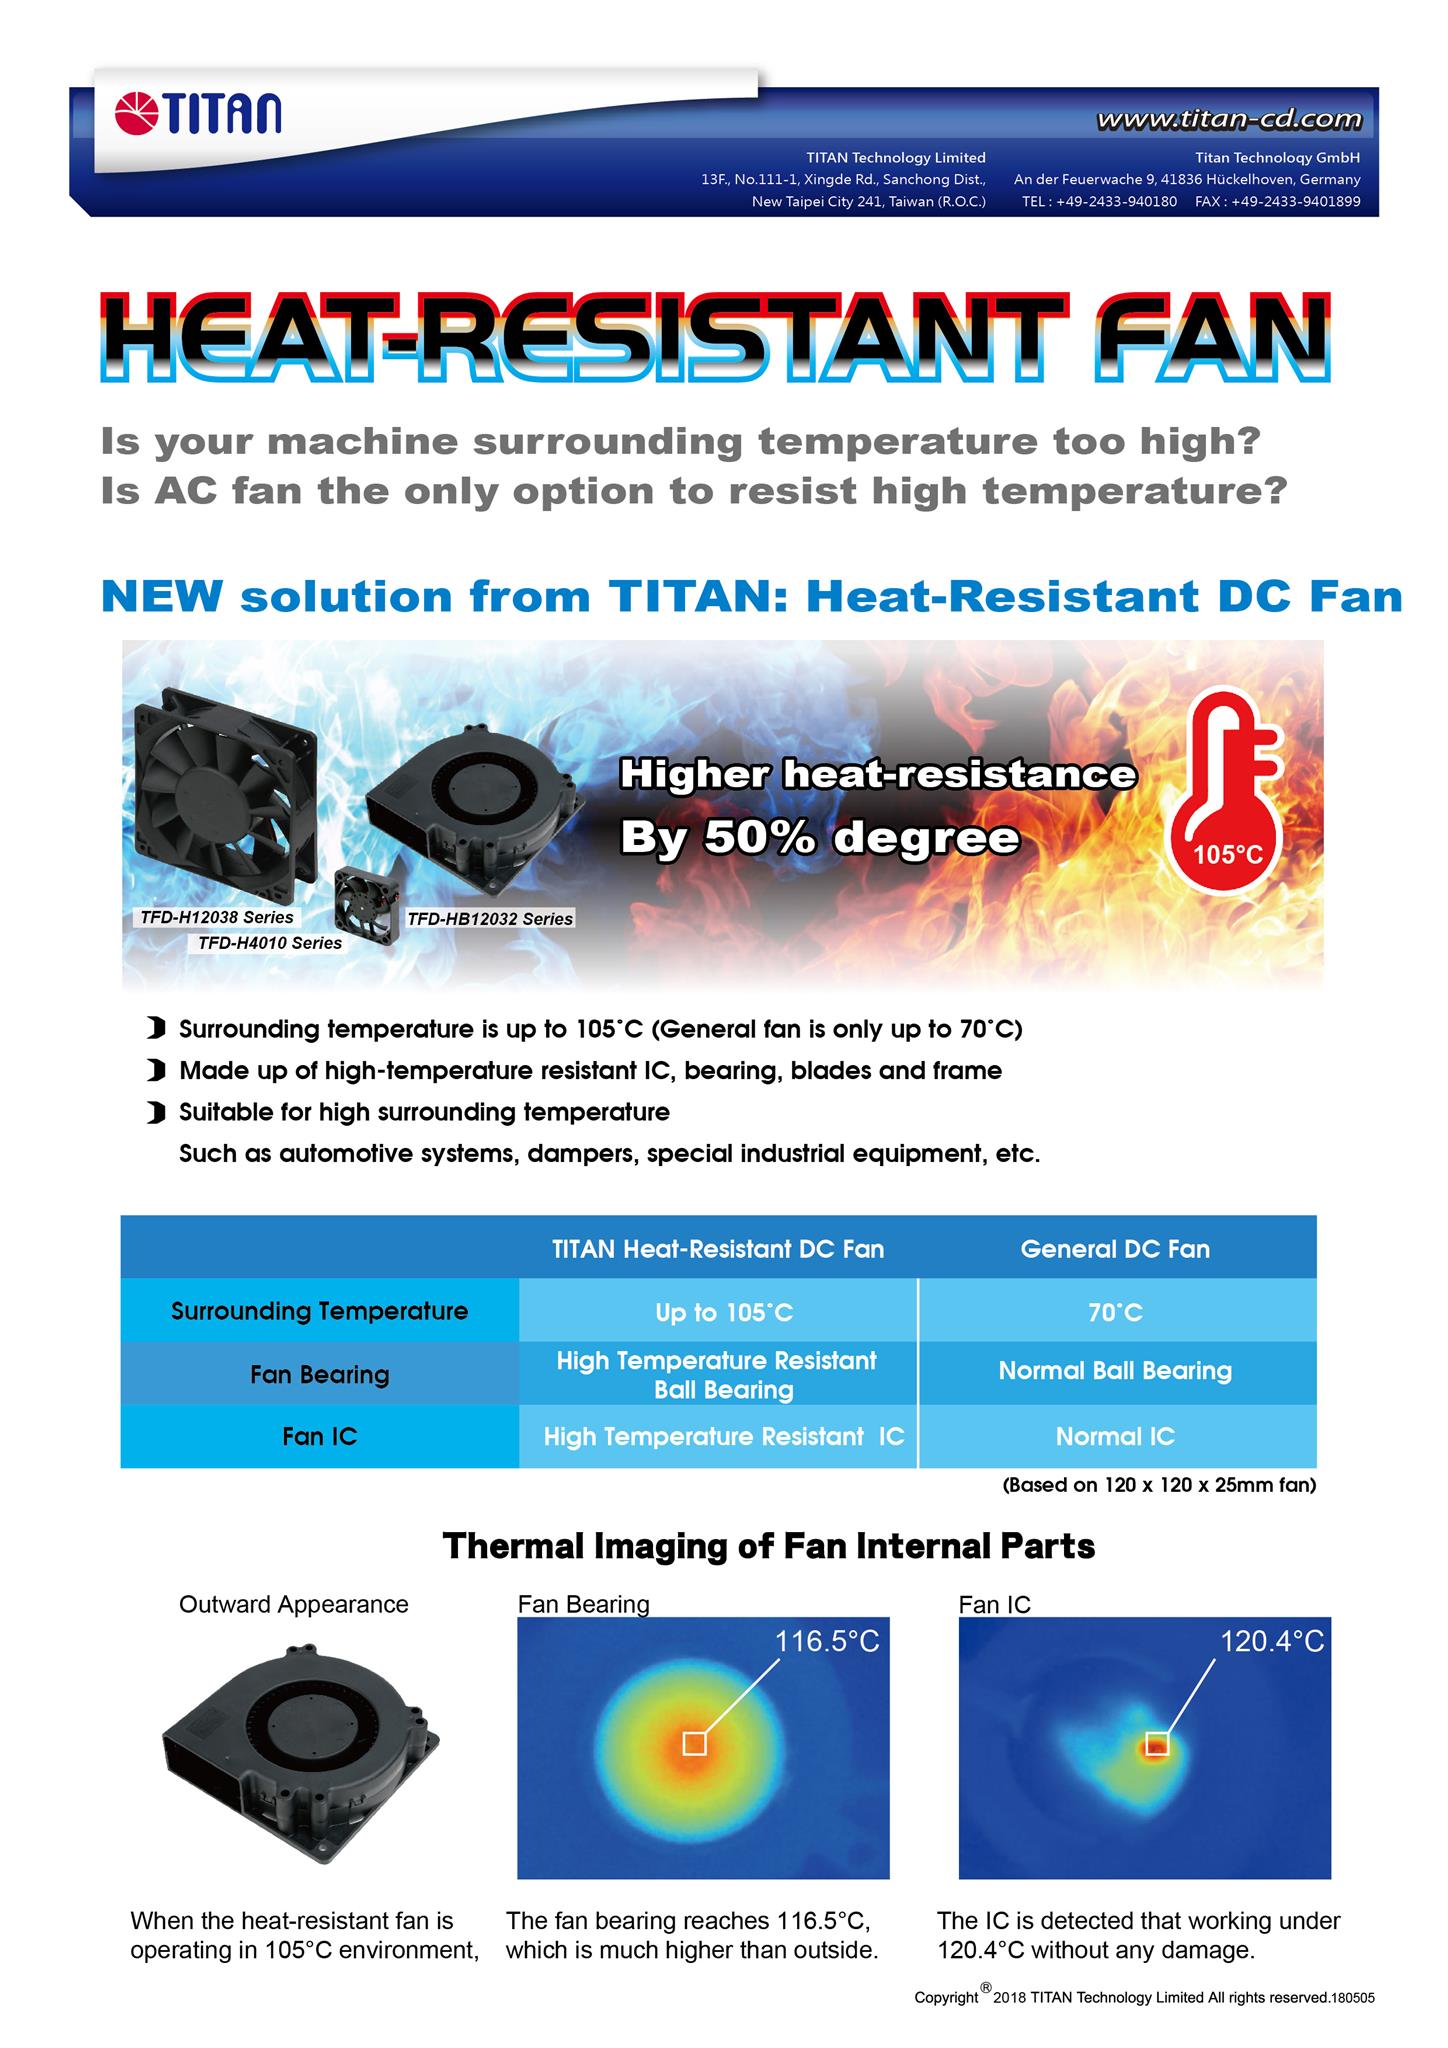 TITAN low profile CPU cooler is only 23-30mm height. Suitable for low profile case or other HTPC case /></p></div><div class=